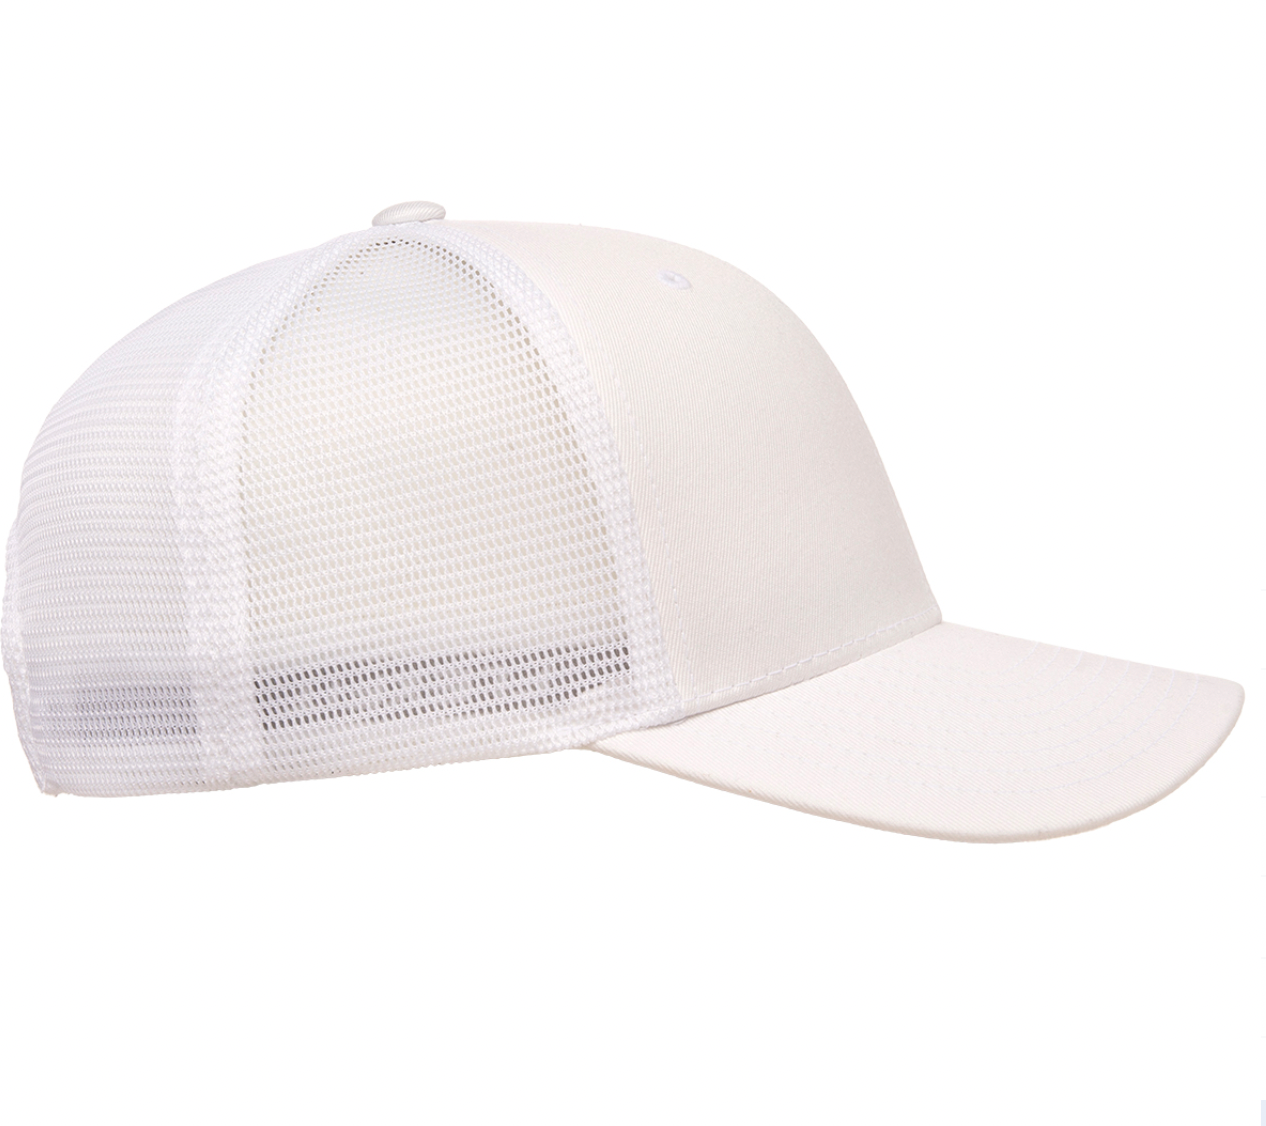 The Iron Cactus Hat in Ivory